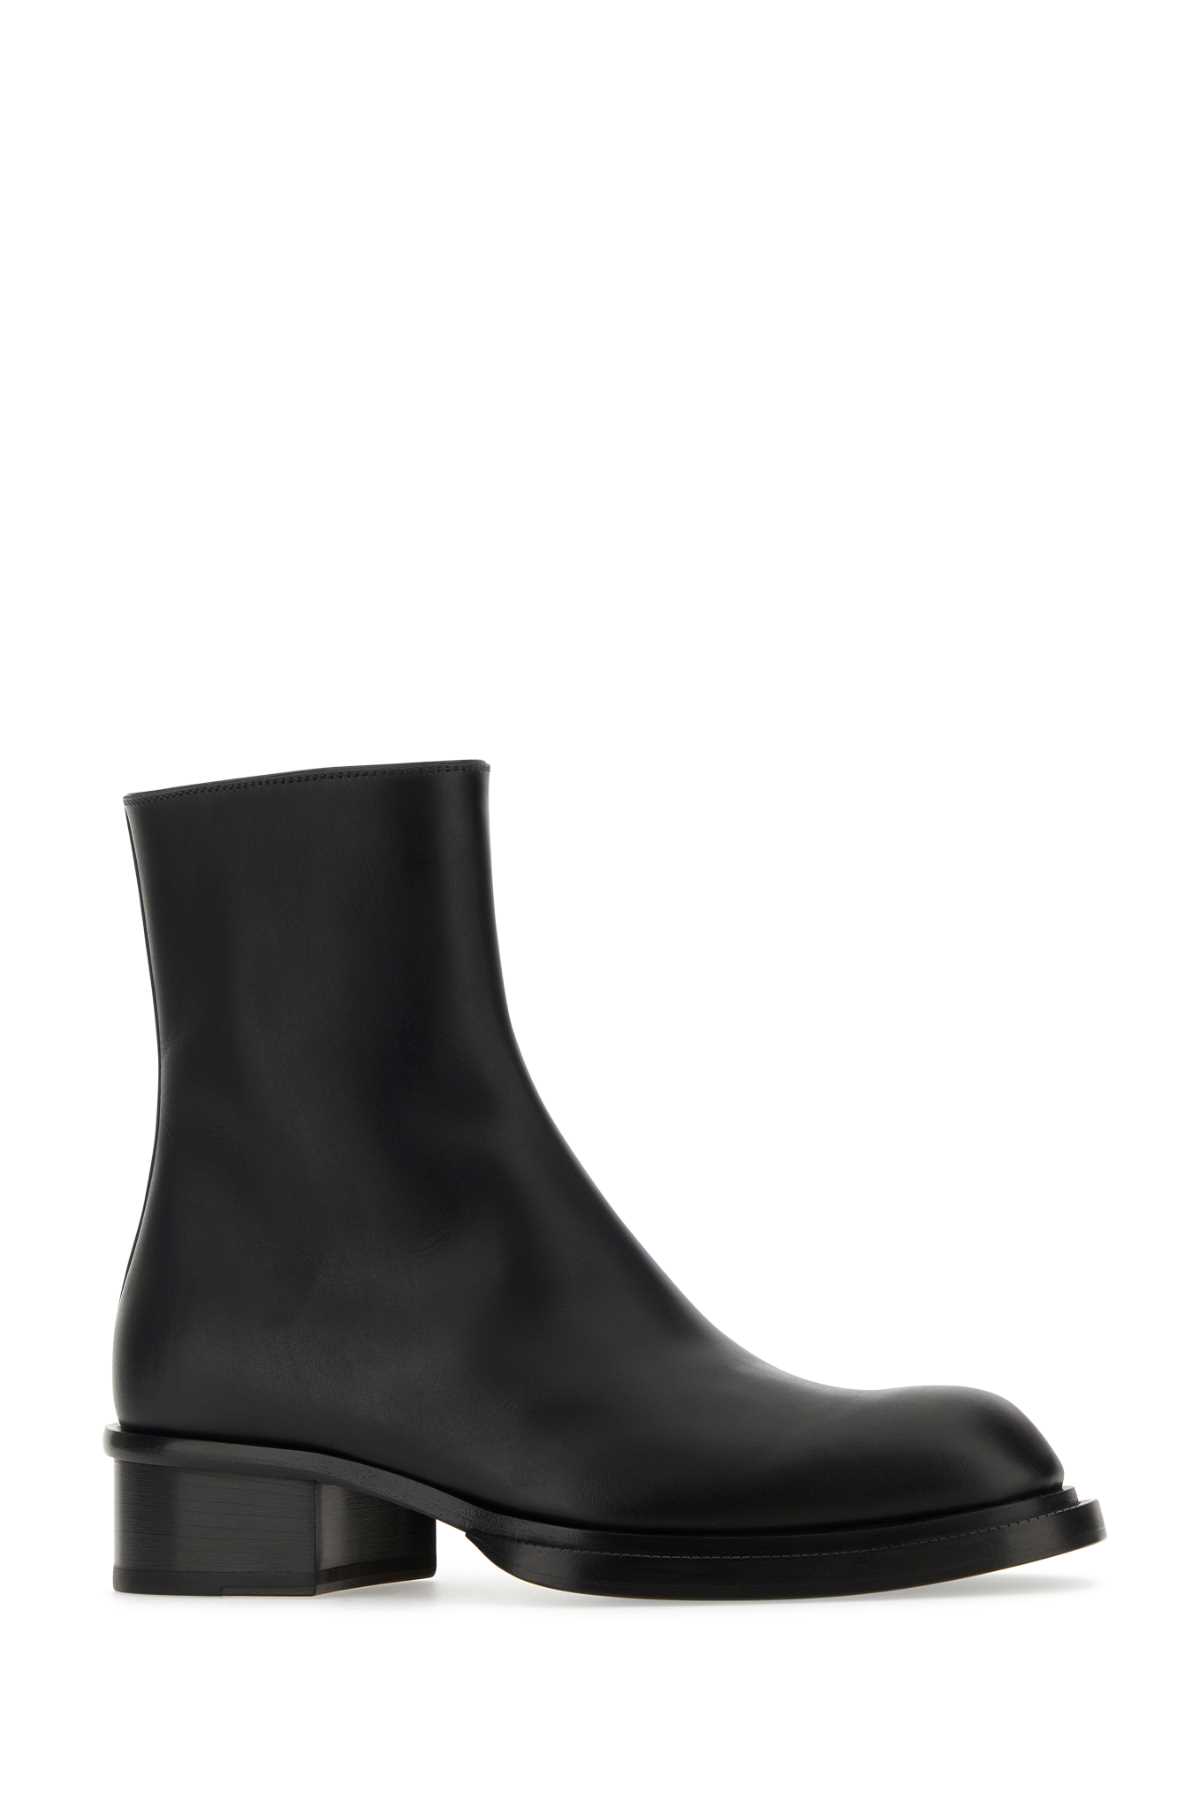 Alexander Mcqueen Black Leather Stack Ankle Boots